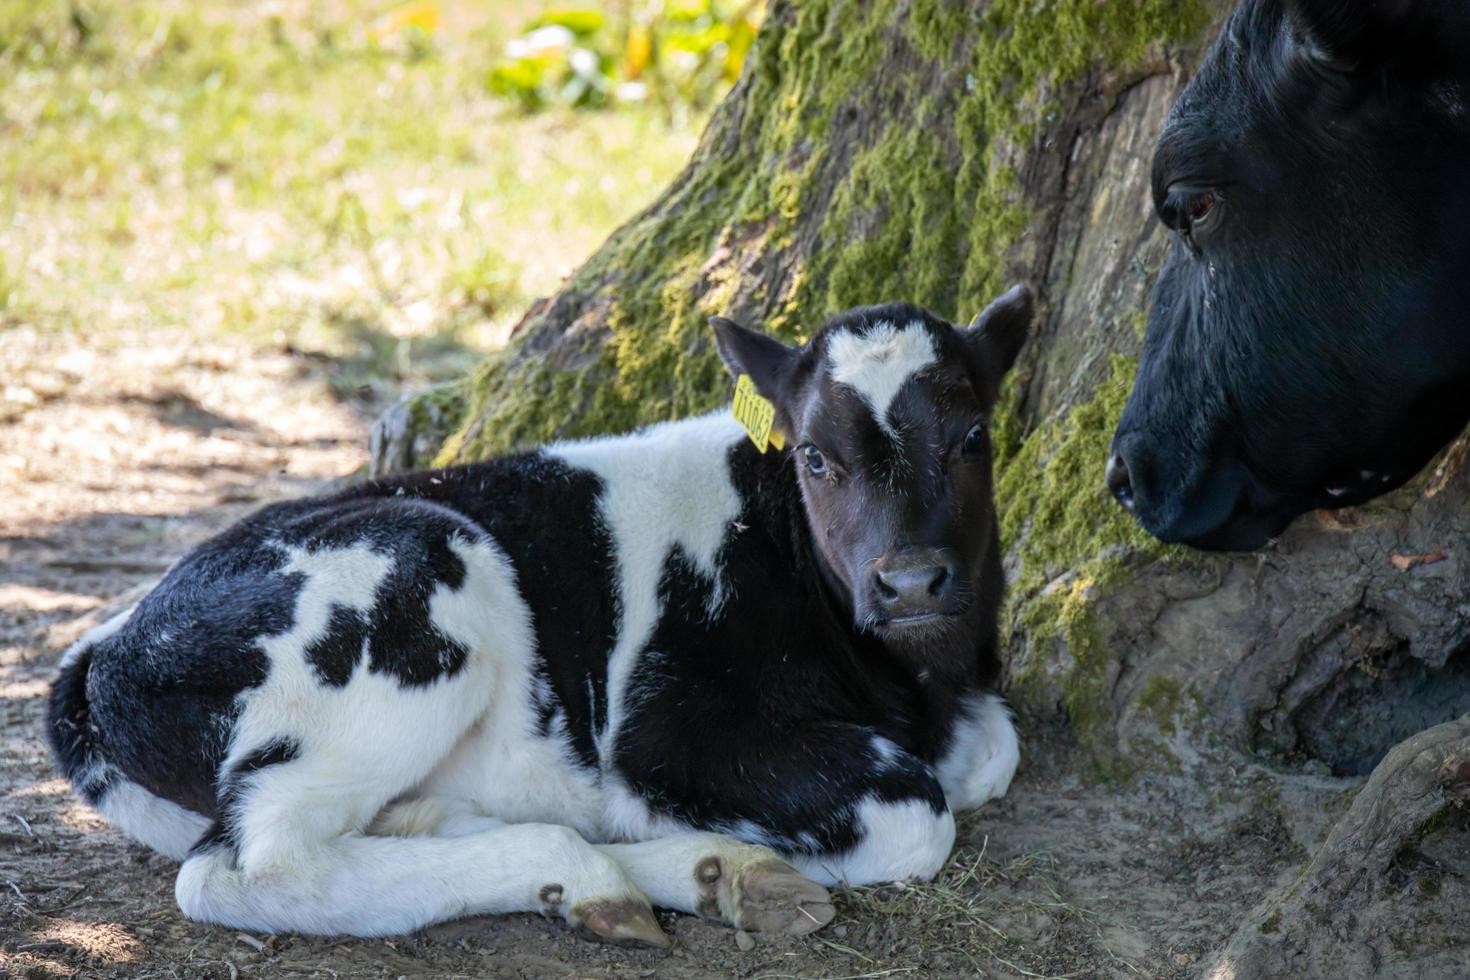 Black and white Calf sheltering from the warm spring sunshine photo